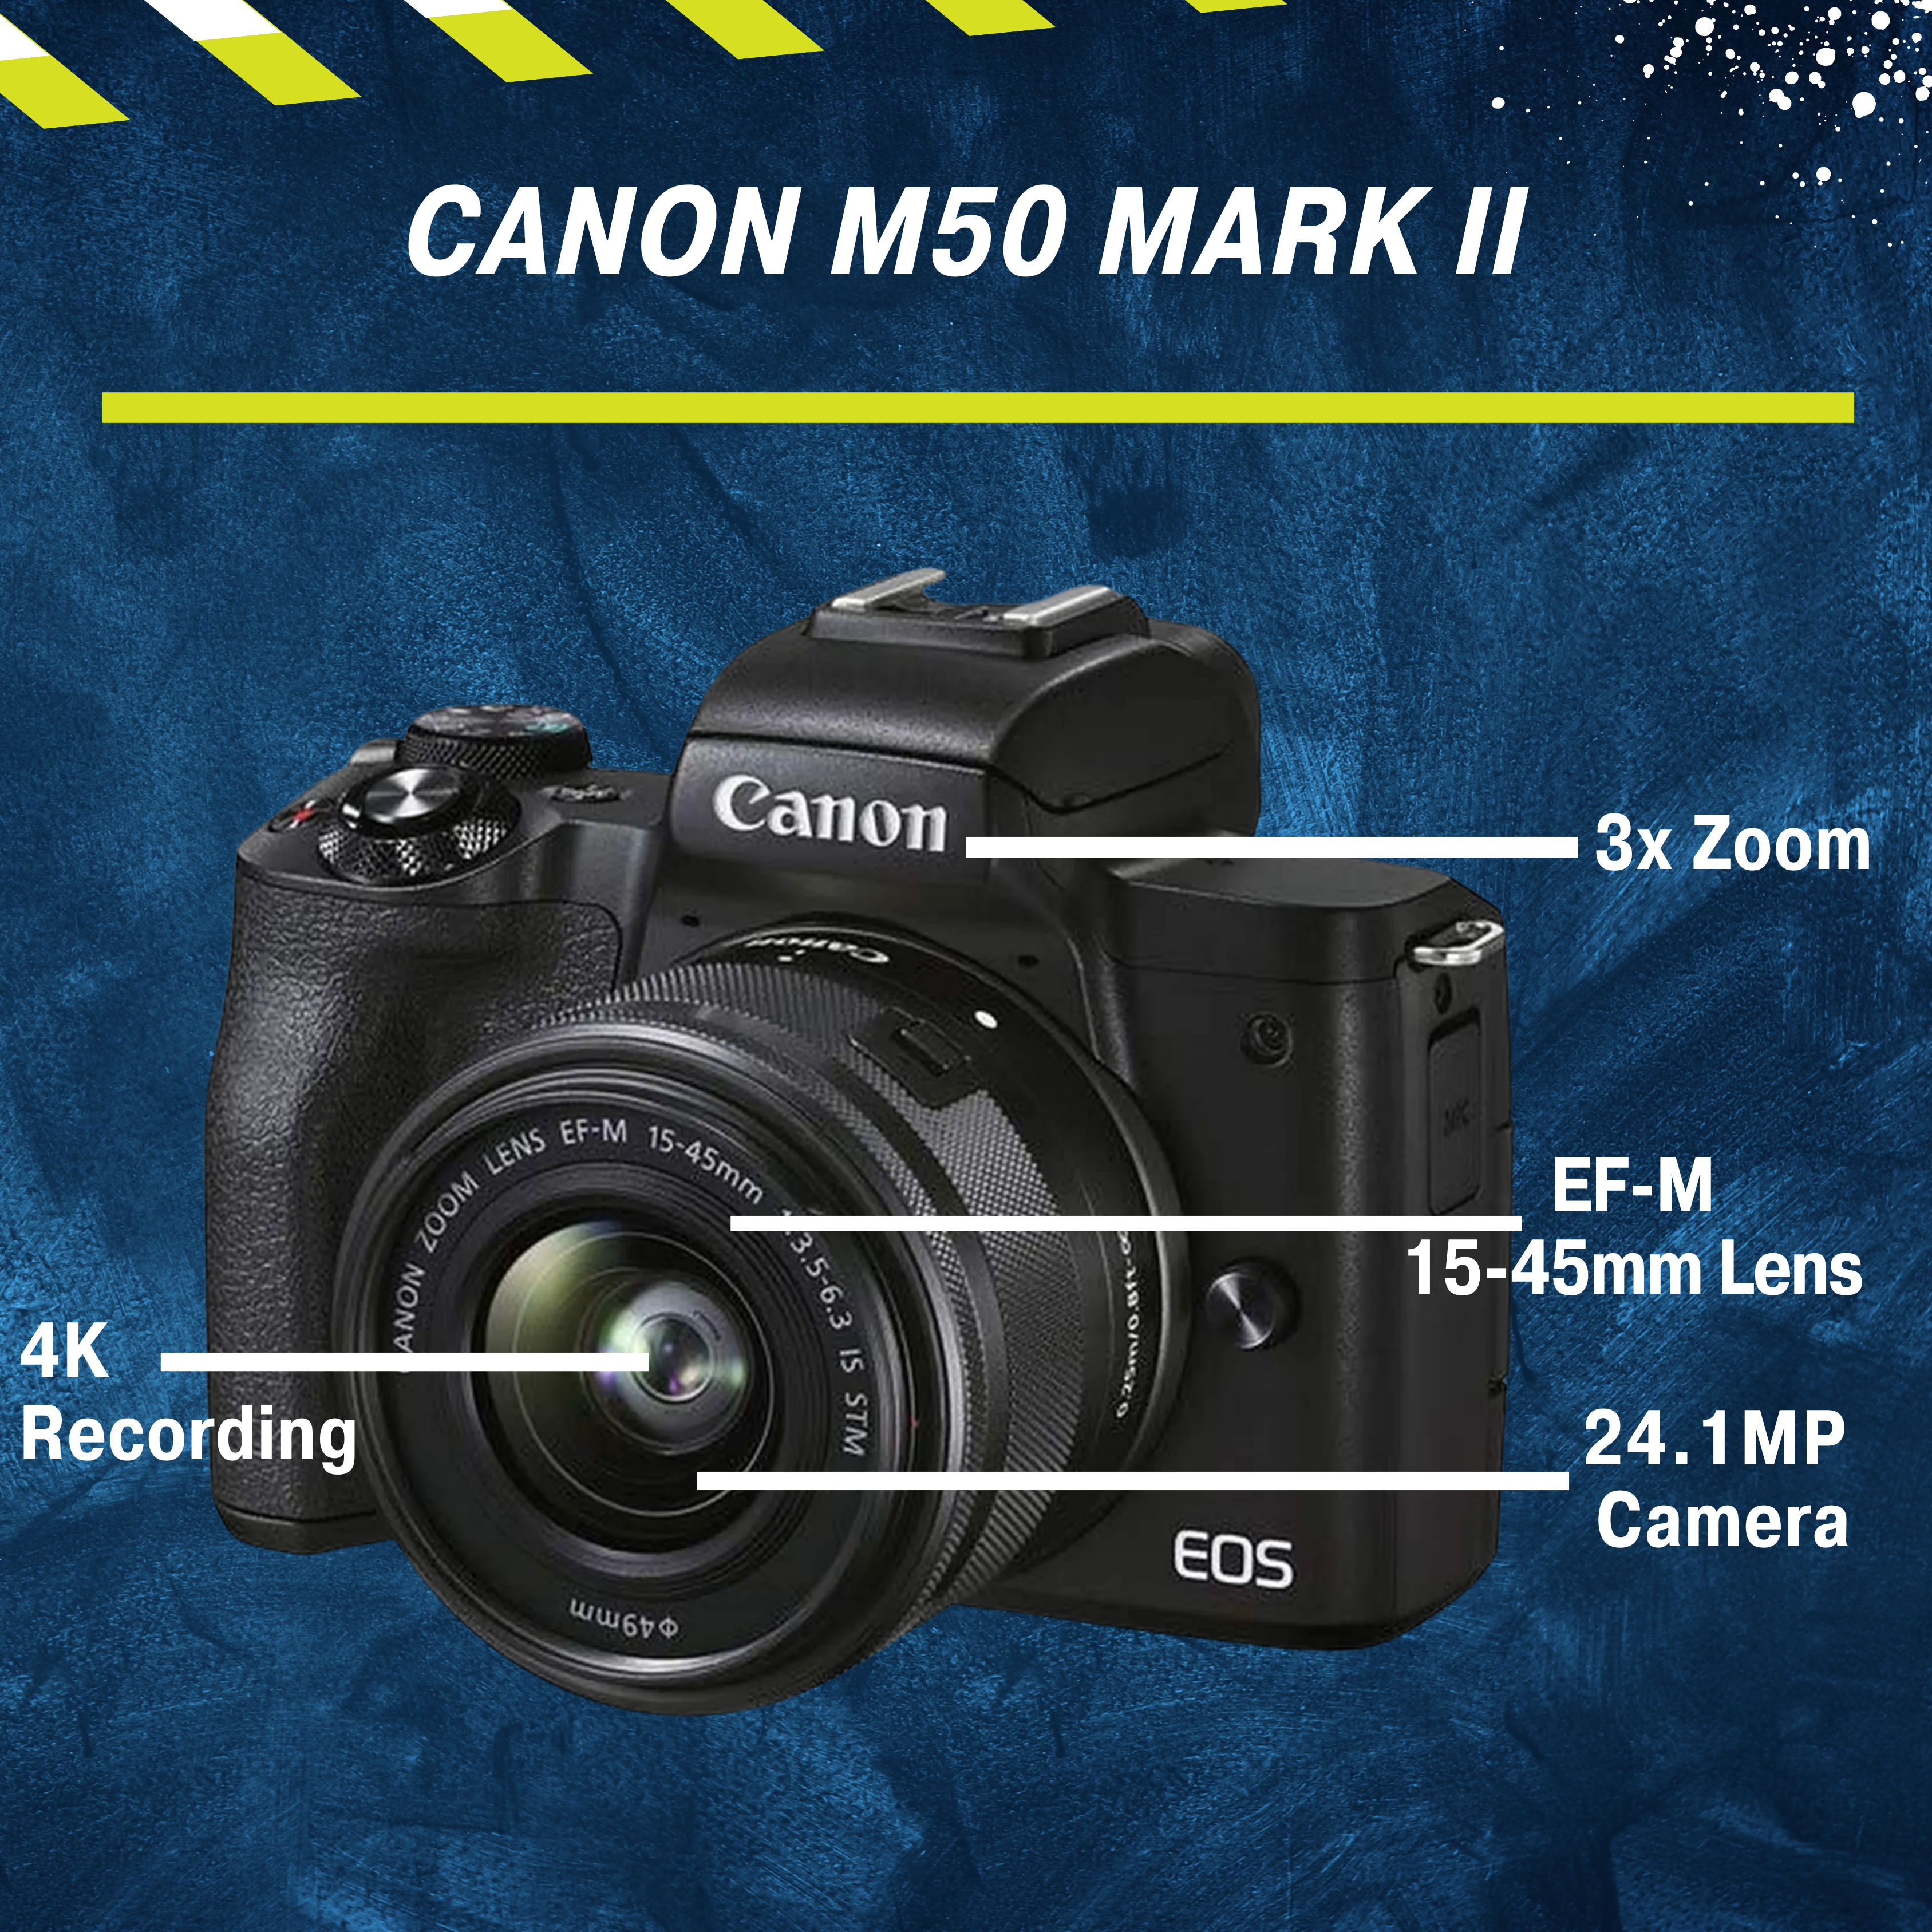 These are product images of Canon M50 Mark II on rent by SharePal.